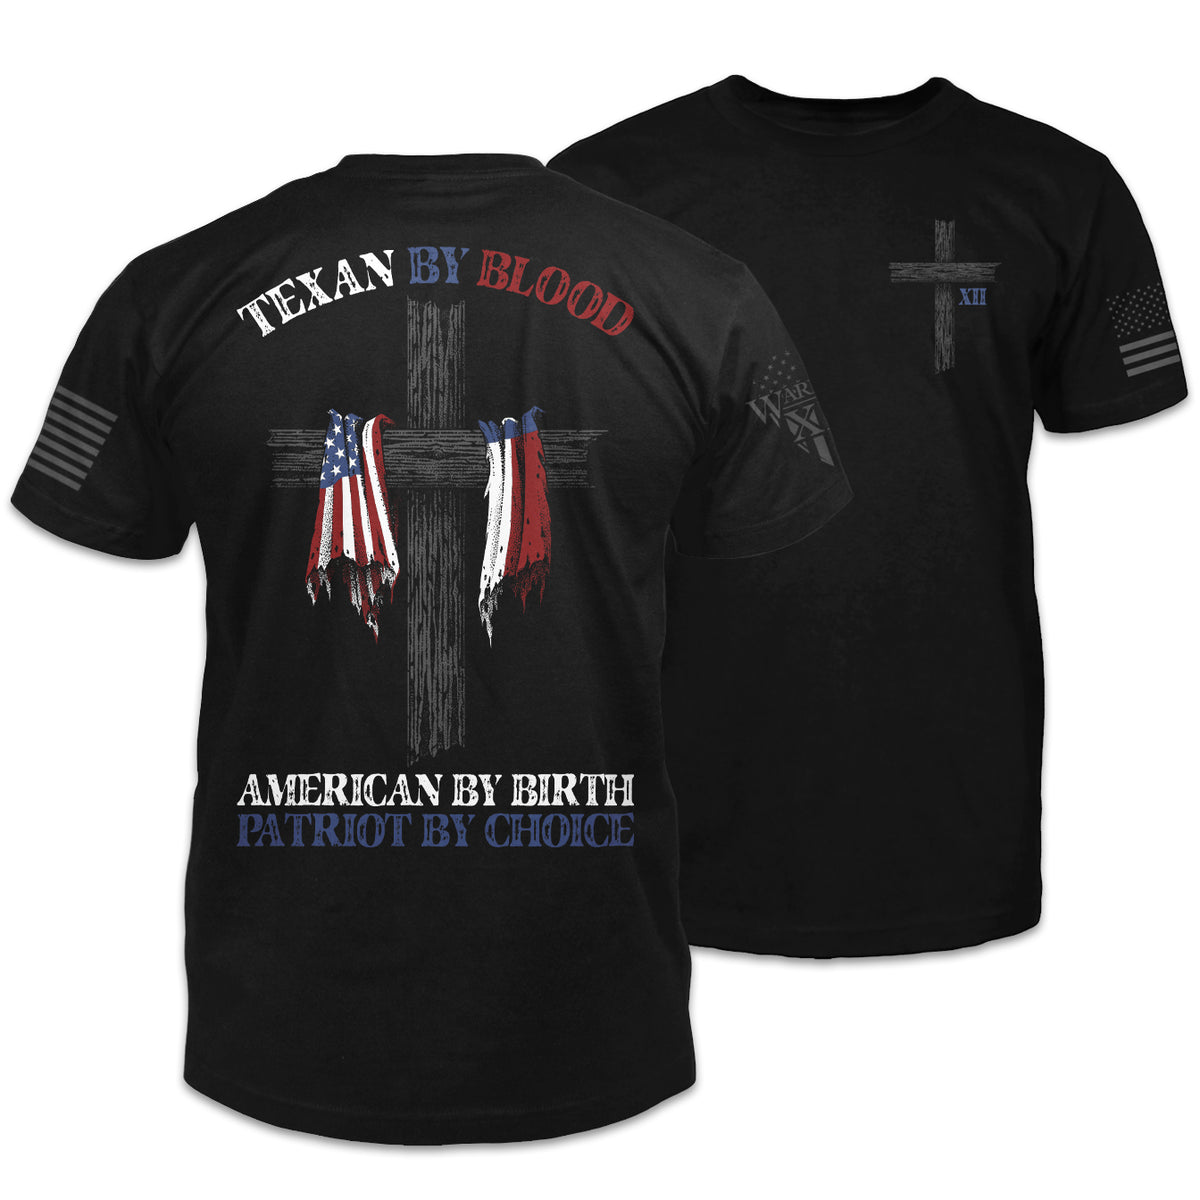 Front and back black t-shirt with the words "Texan by blood, American by birth, patriot by choice" with the Texas and USA flag printed on the shirt.